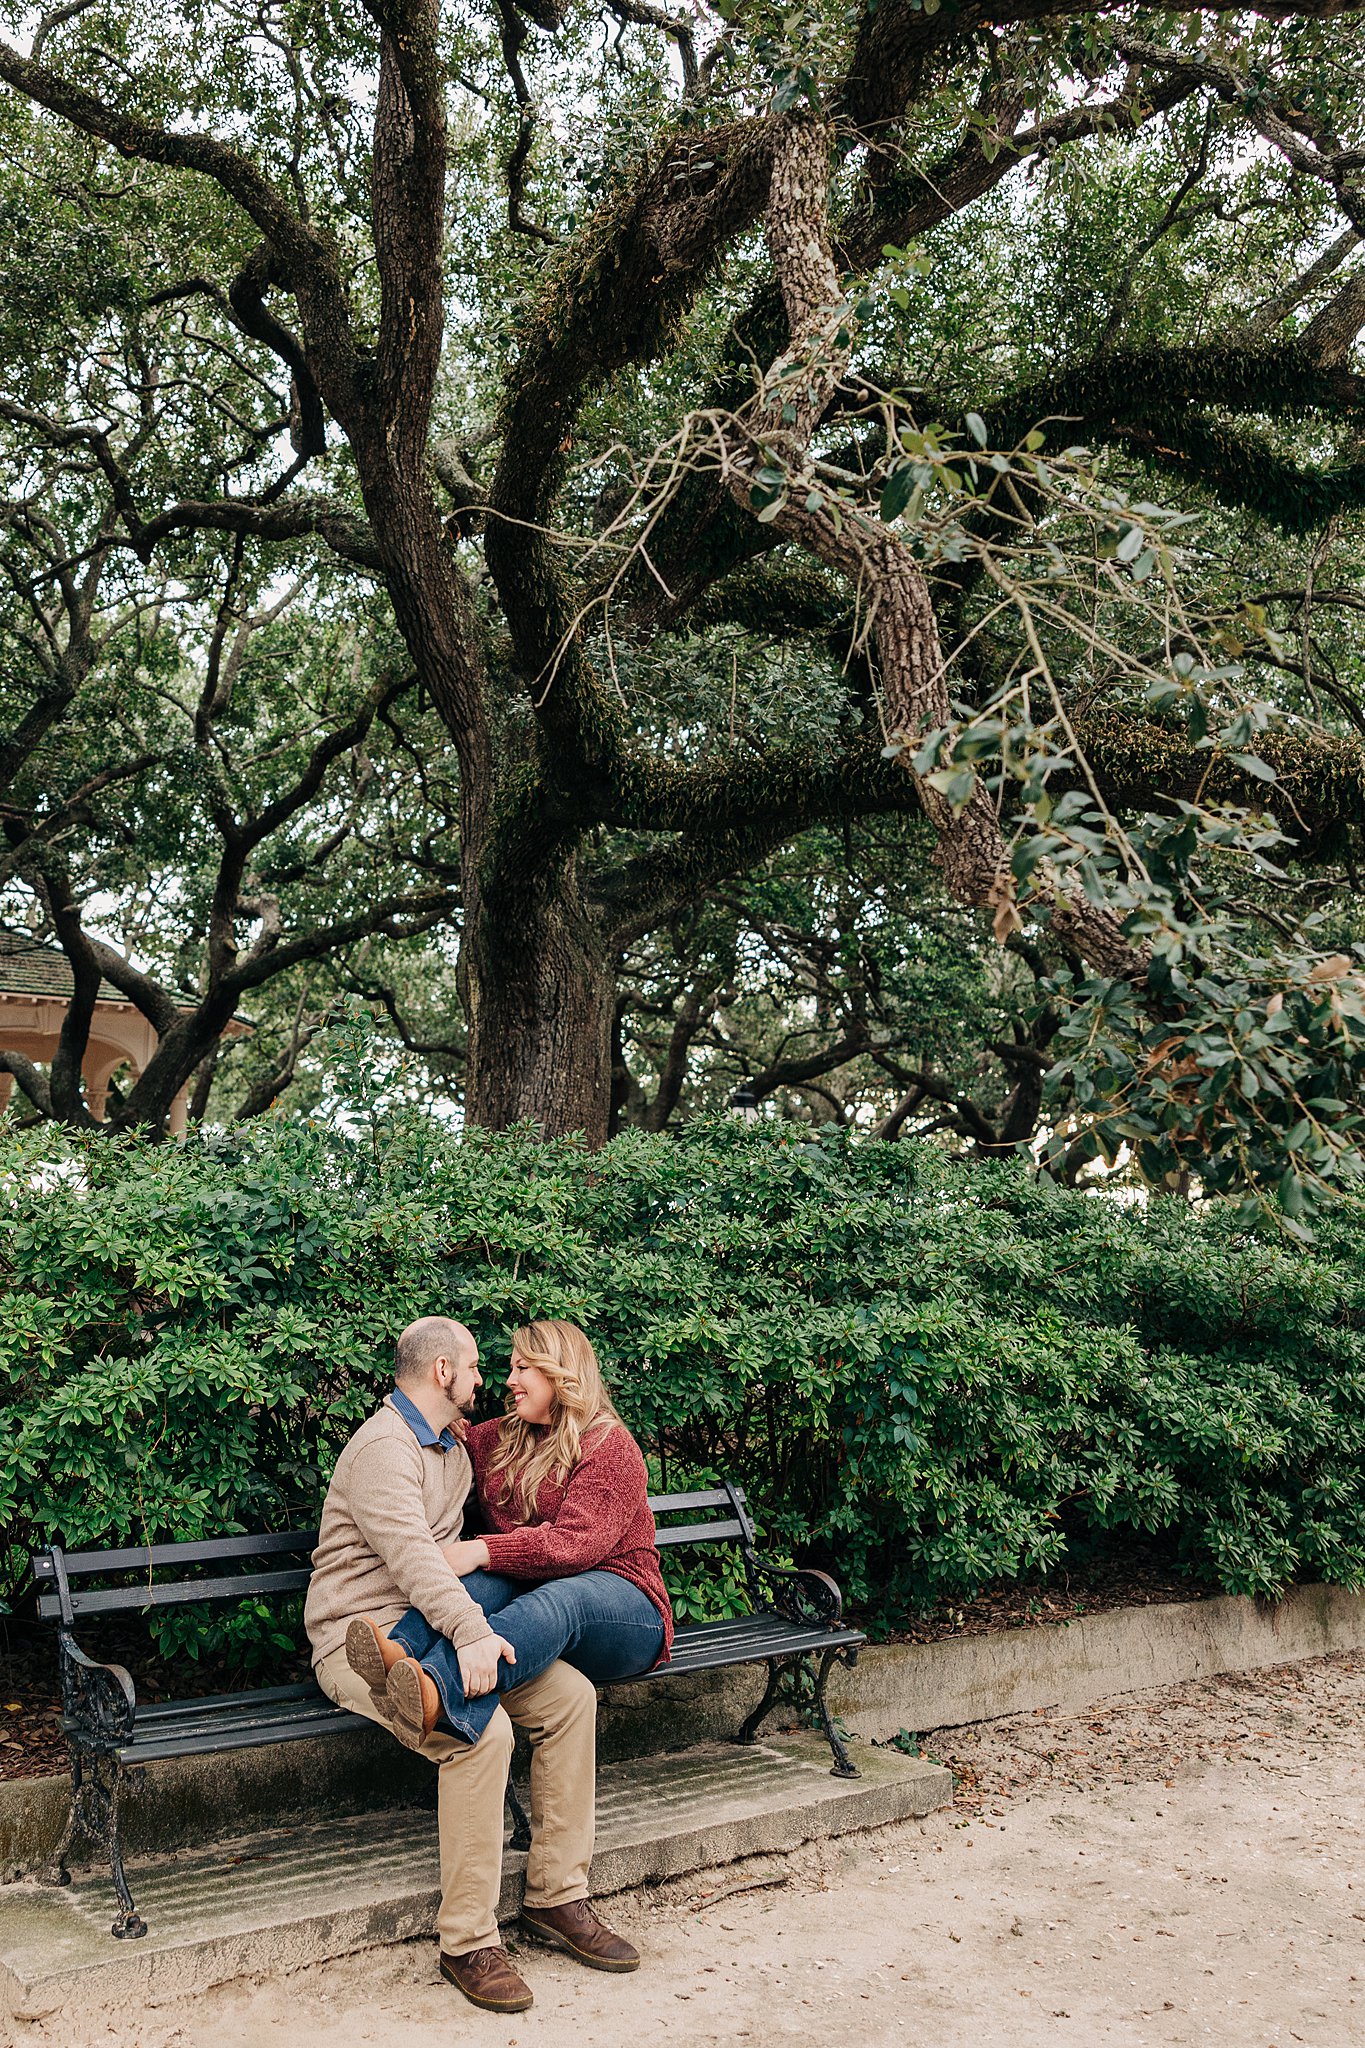 A newly engaged couple cuddle on a bench under an oak tree during their cypress gardens wedding engagement